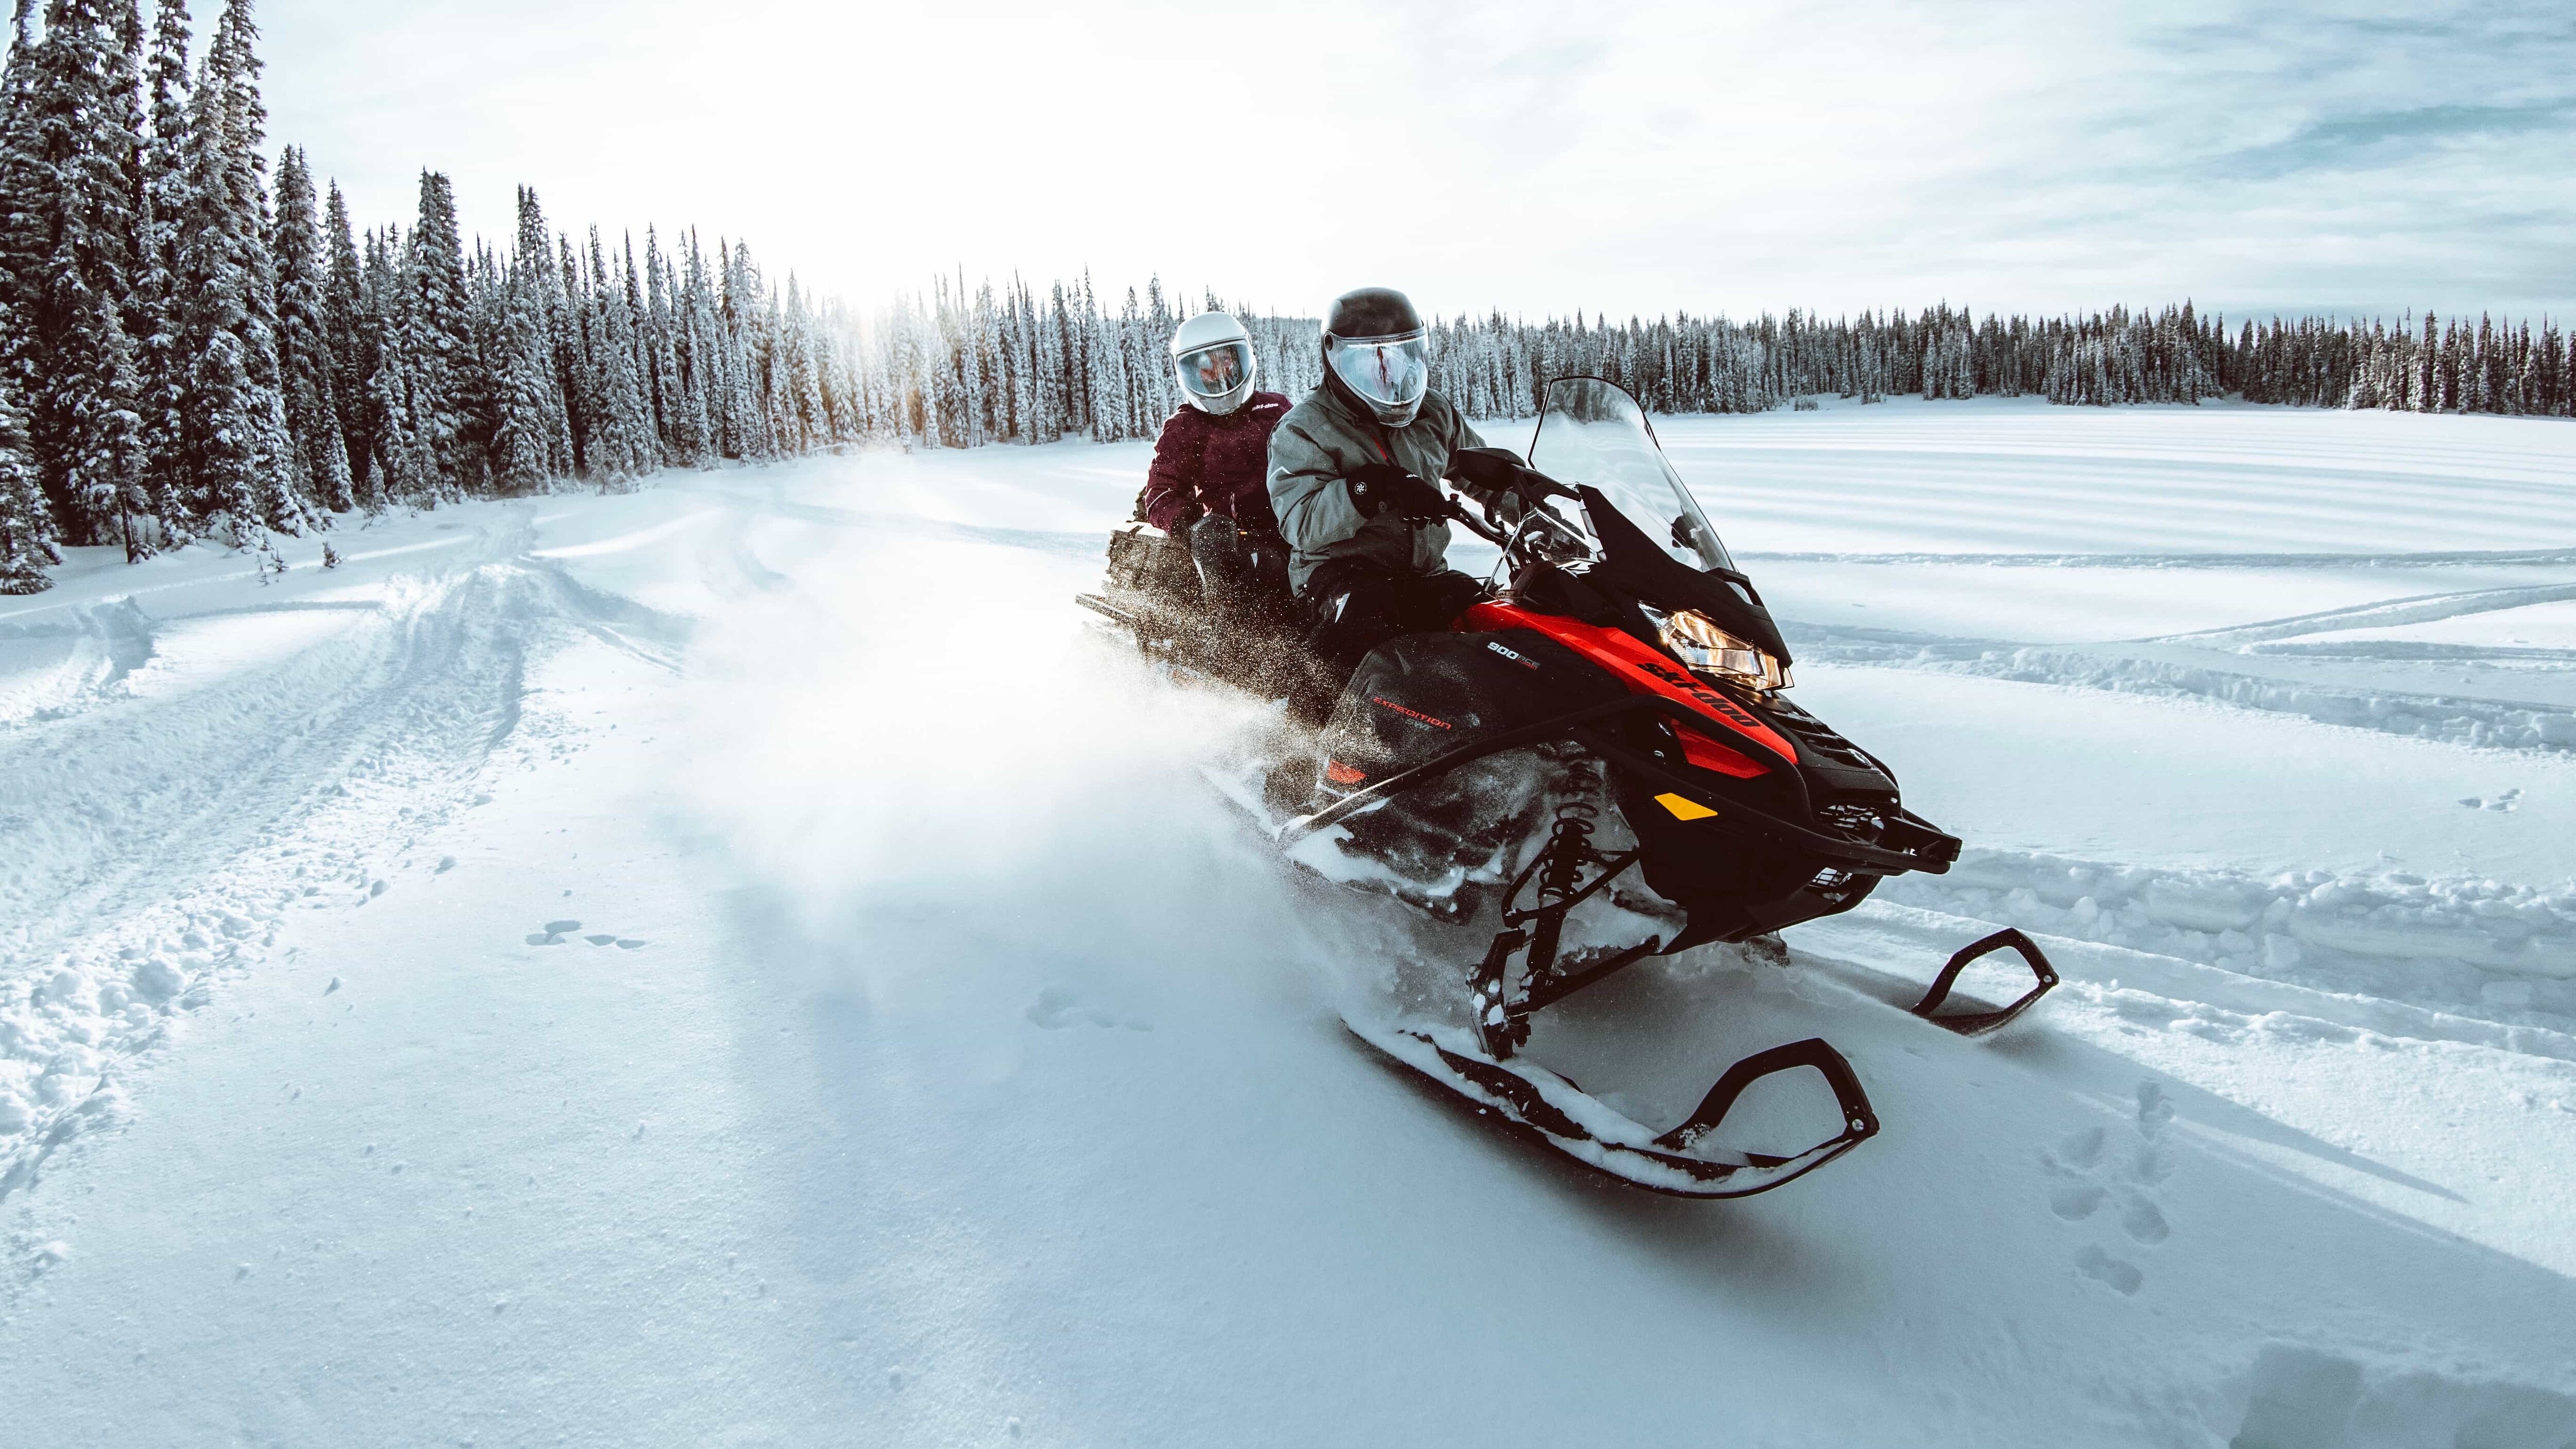 A group of Ski-Doo riders in the snow